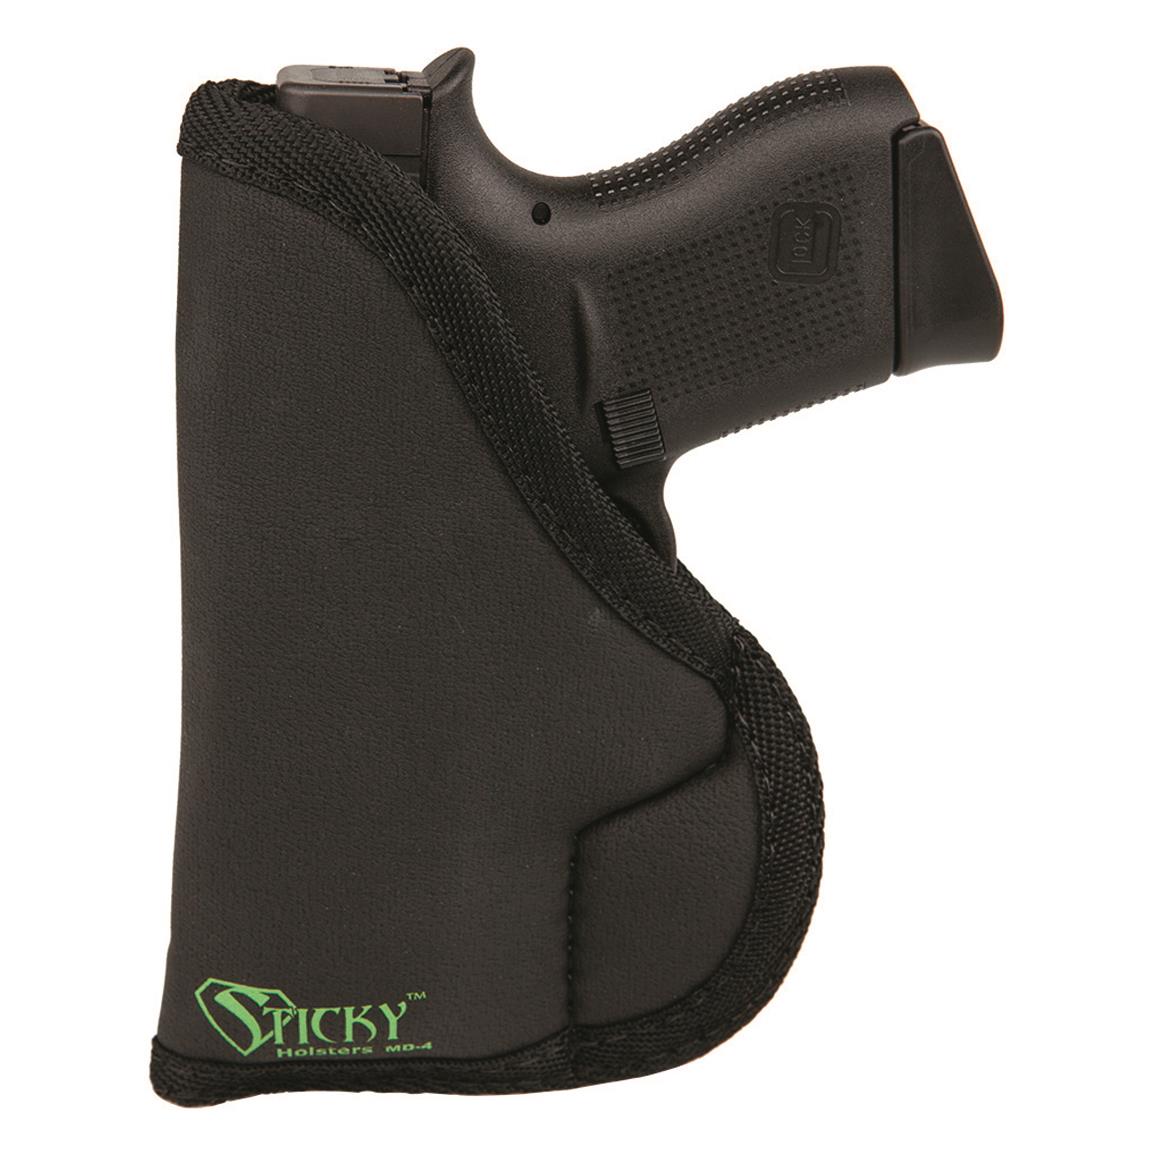 Sticky LG-6 Short IWB Holster, Large Automatic with 3" or 4" Barrel